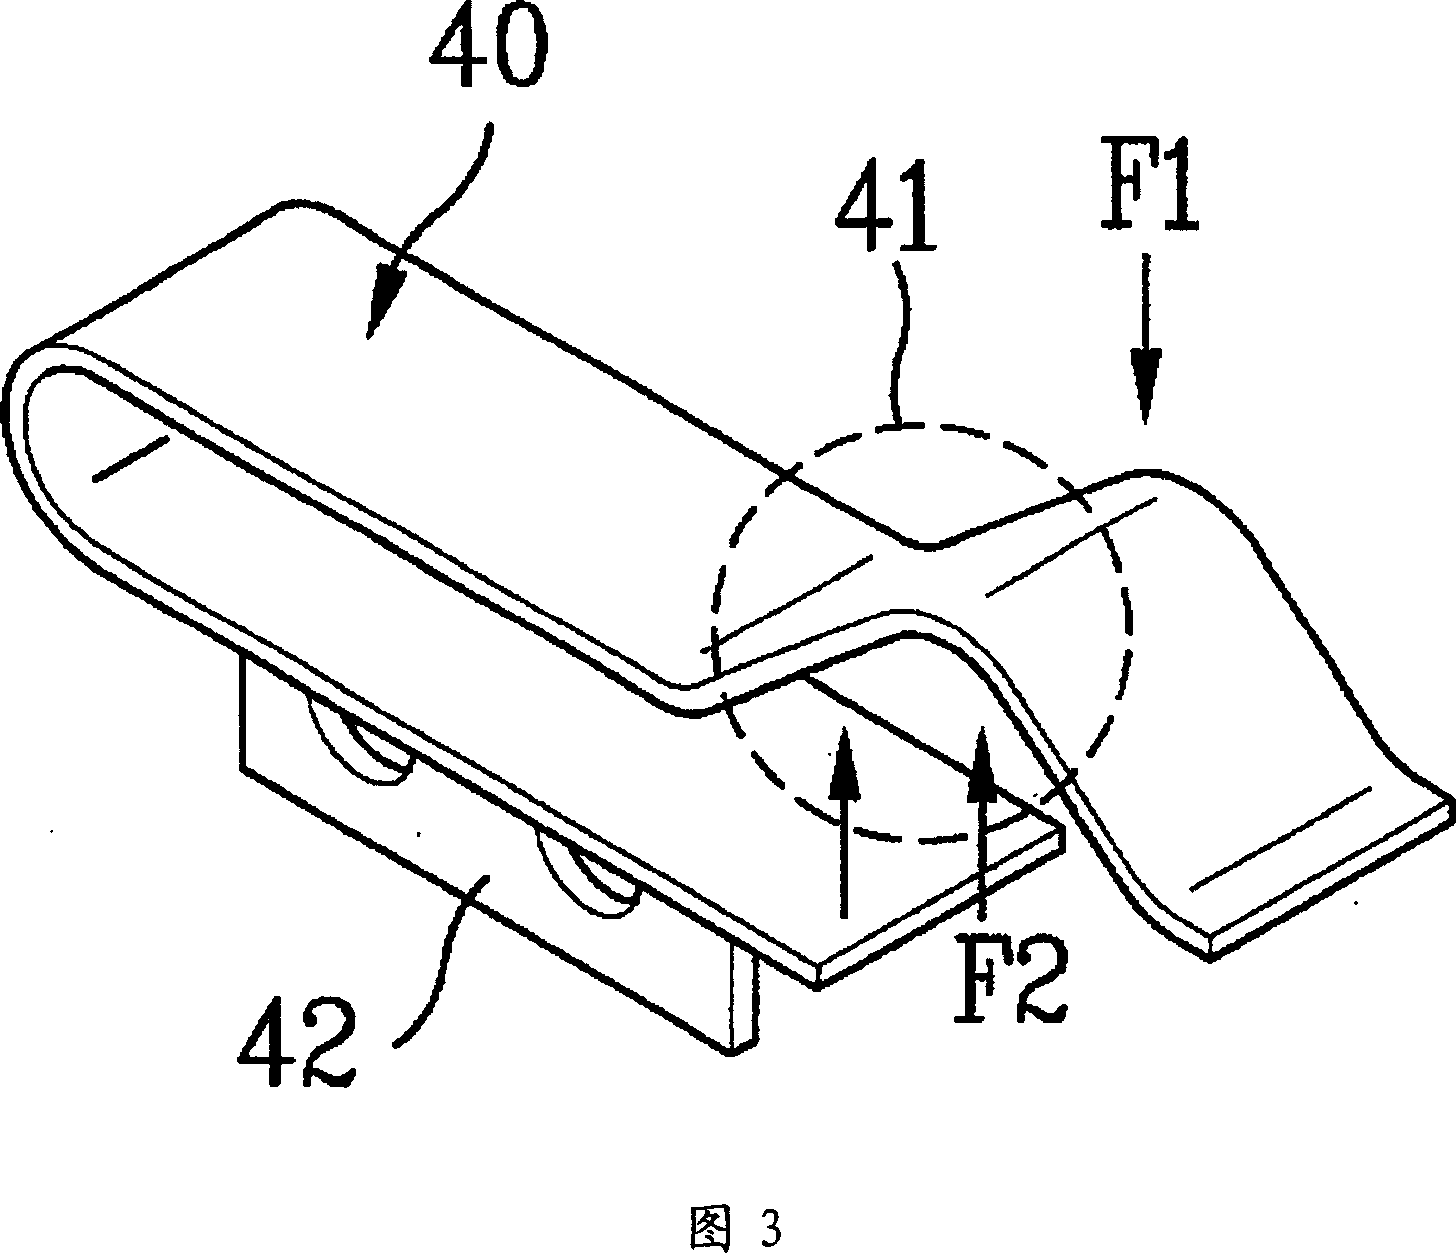 The camera cover apparatus for the mobile communication device